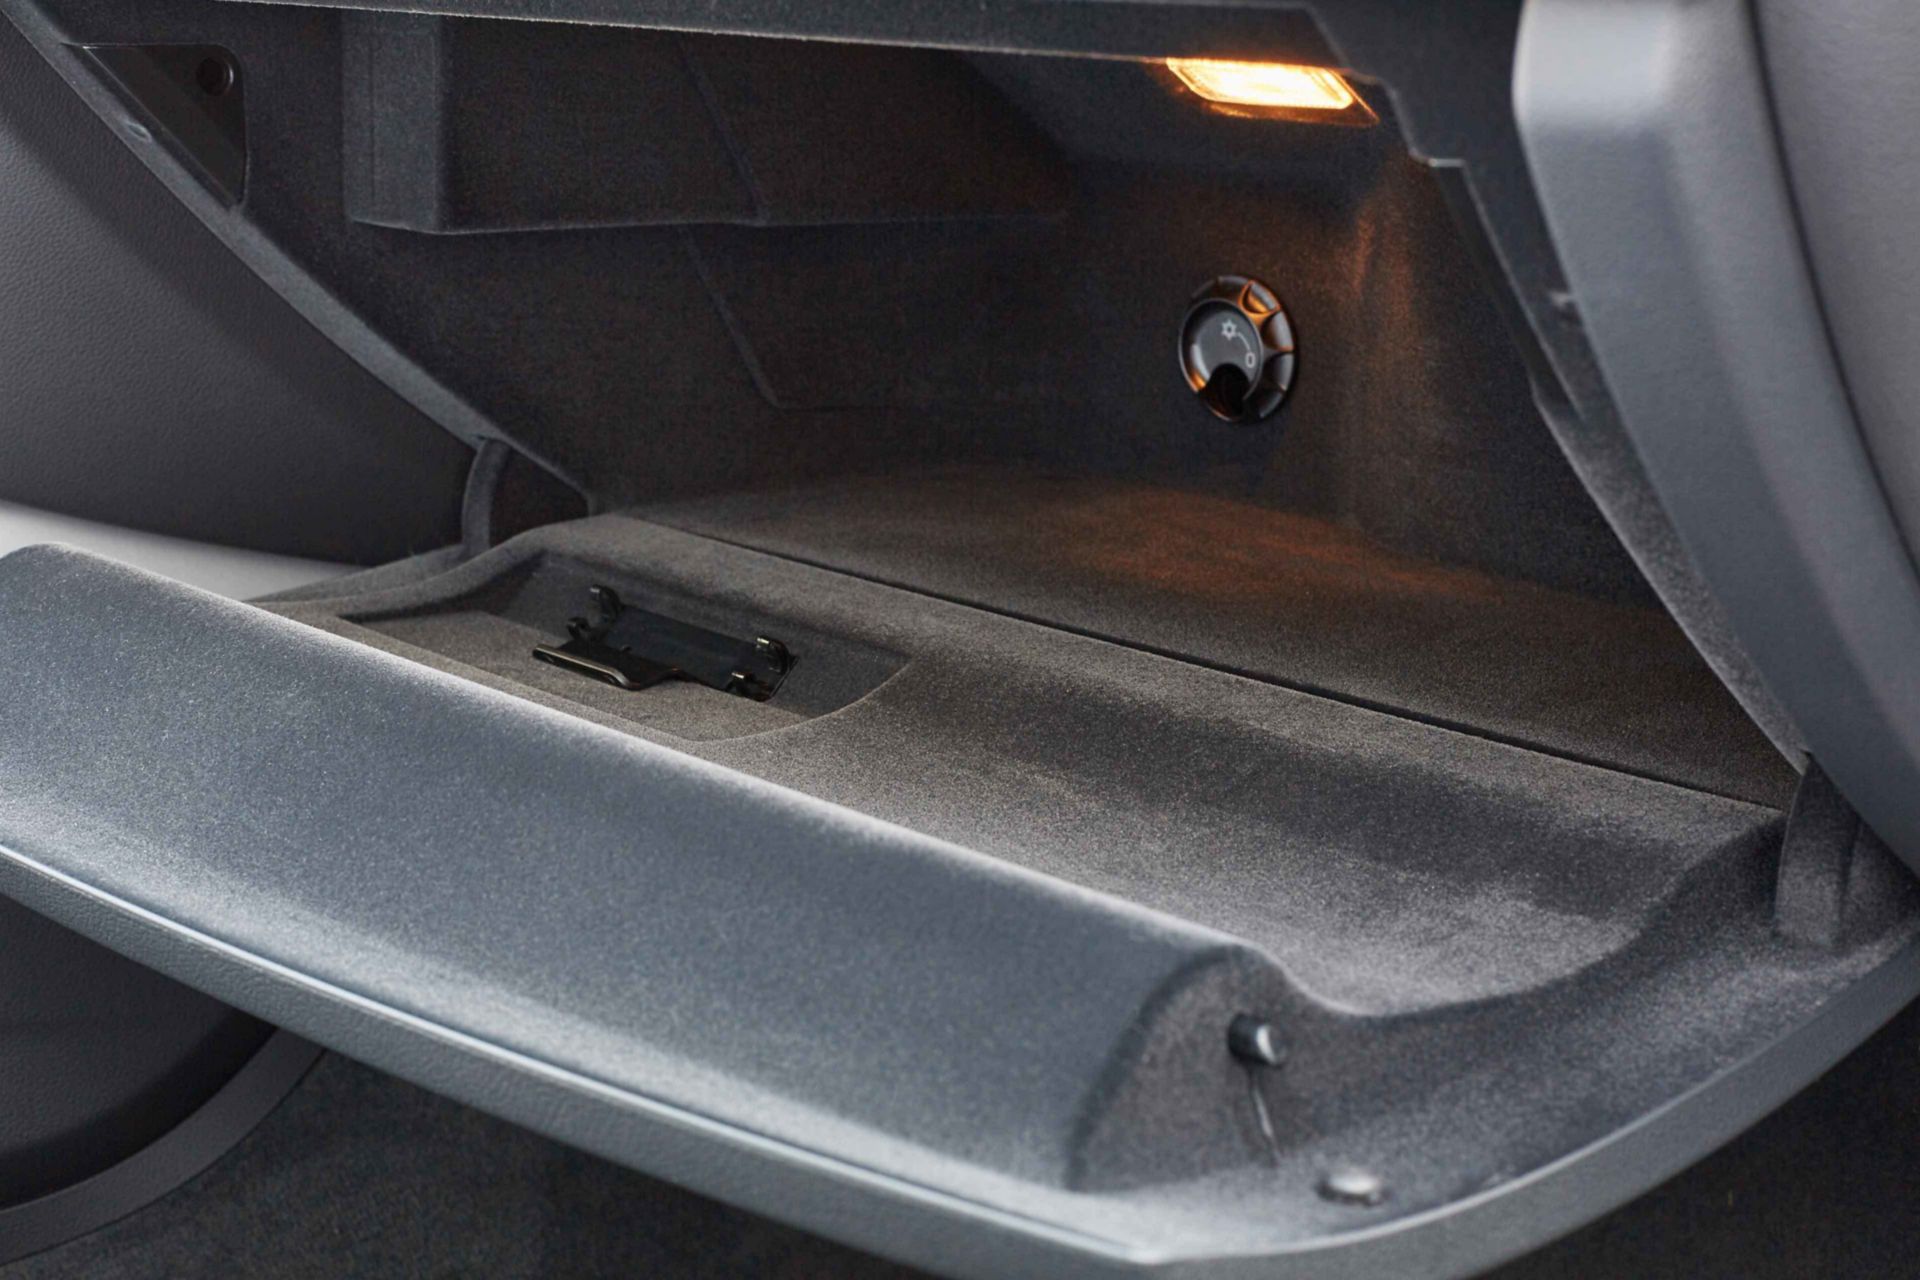 Interior view of vehicle glove box using SikaTherm flocking adhesives solution